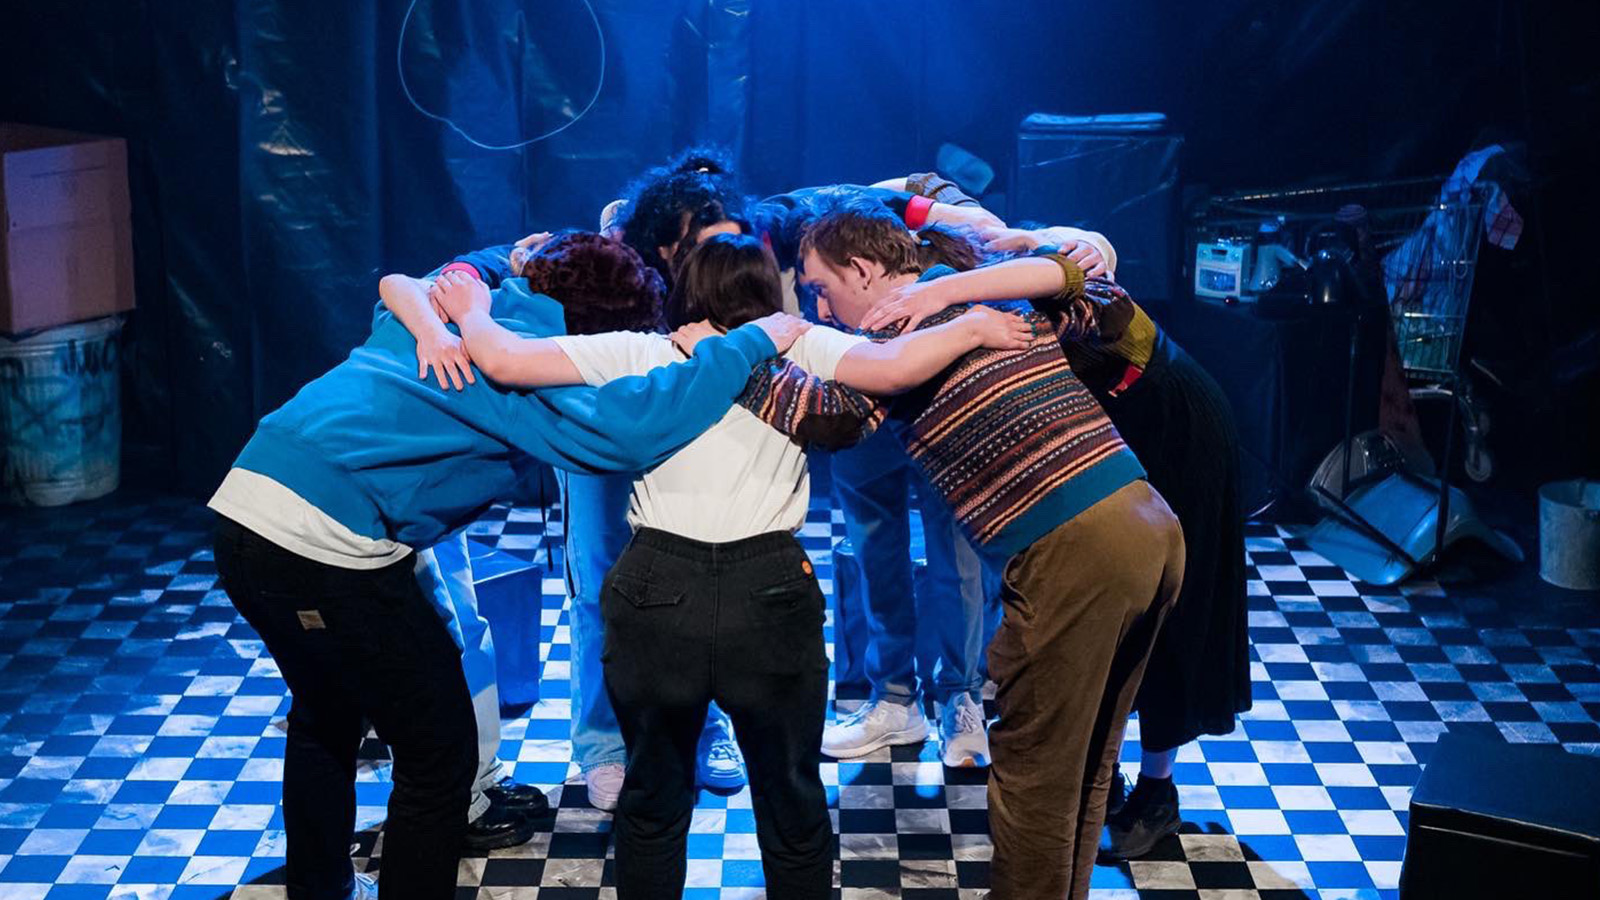 Group of young people stand in a huddle on stage during a performance of Crisis: A Rallying Cry, deep in conversation